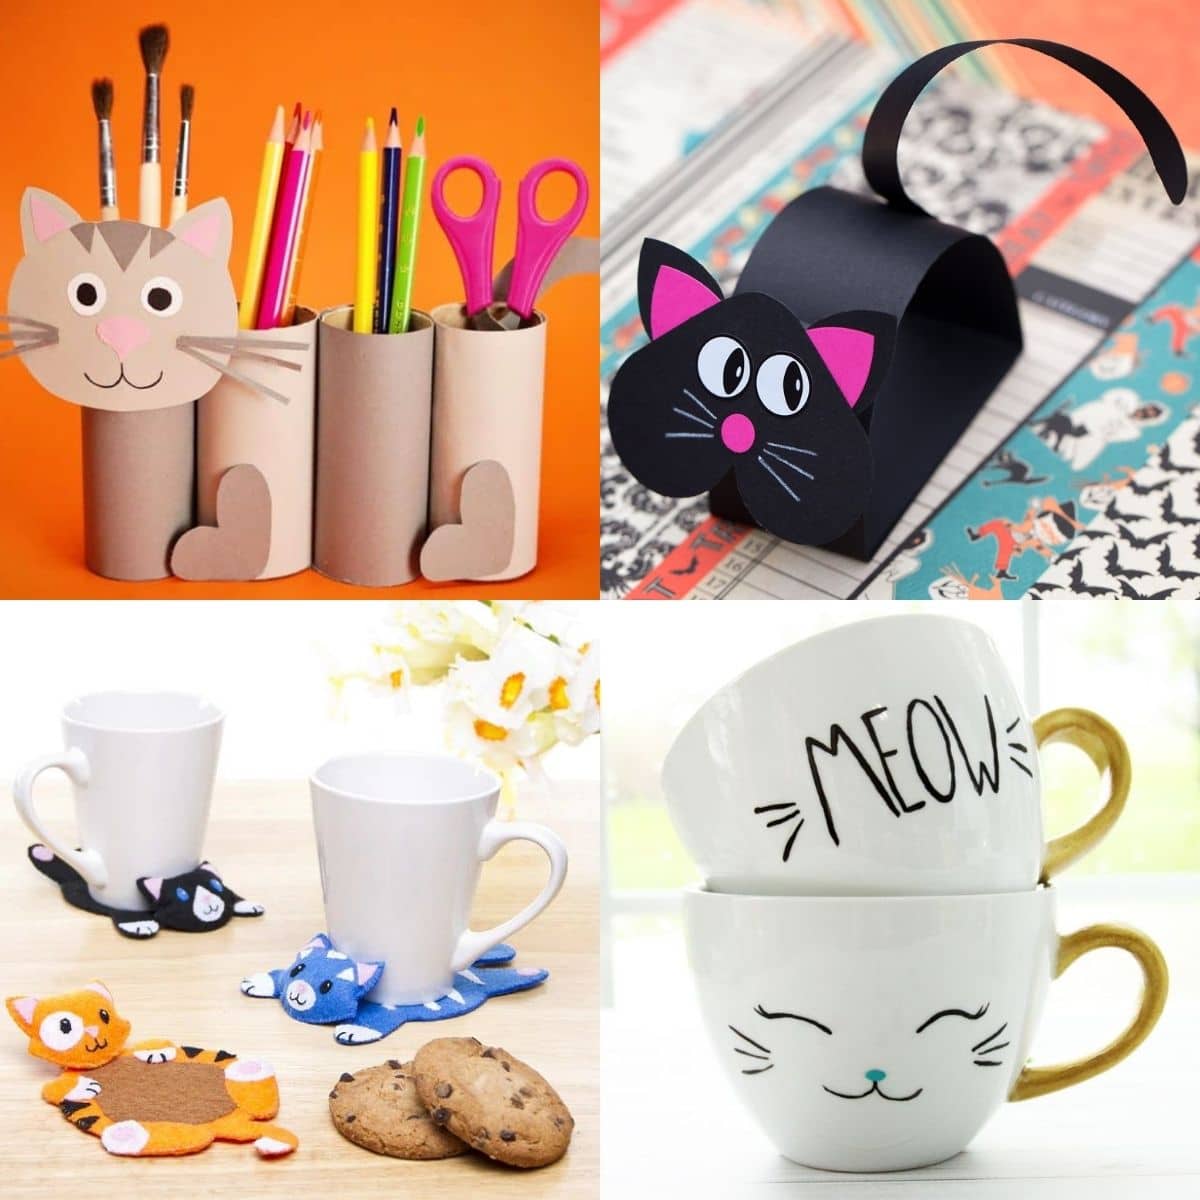 Purrfectly cute cat craft using air drying clay - NurtureStore